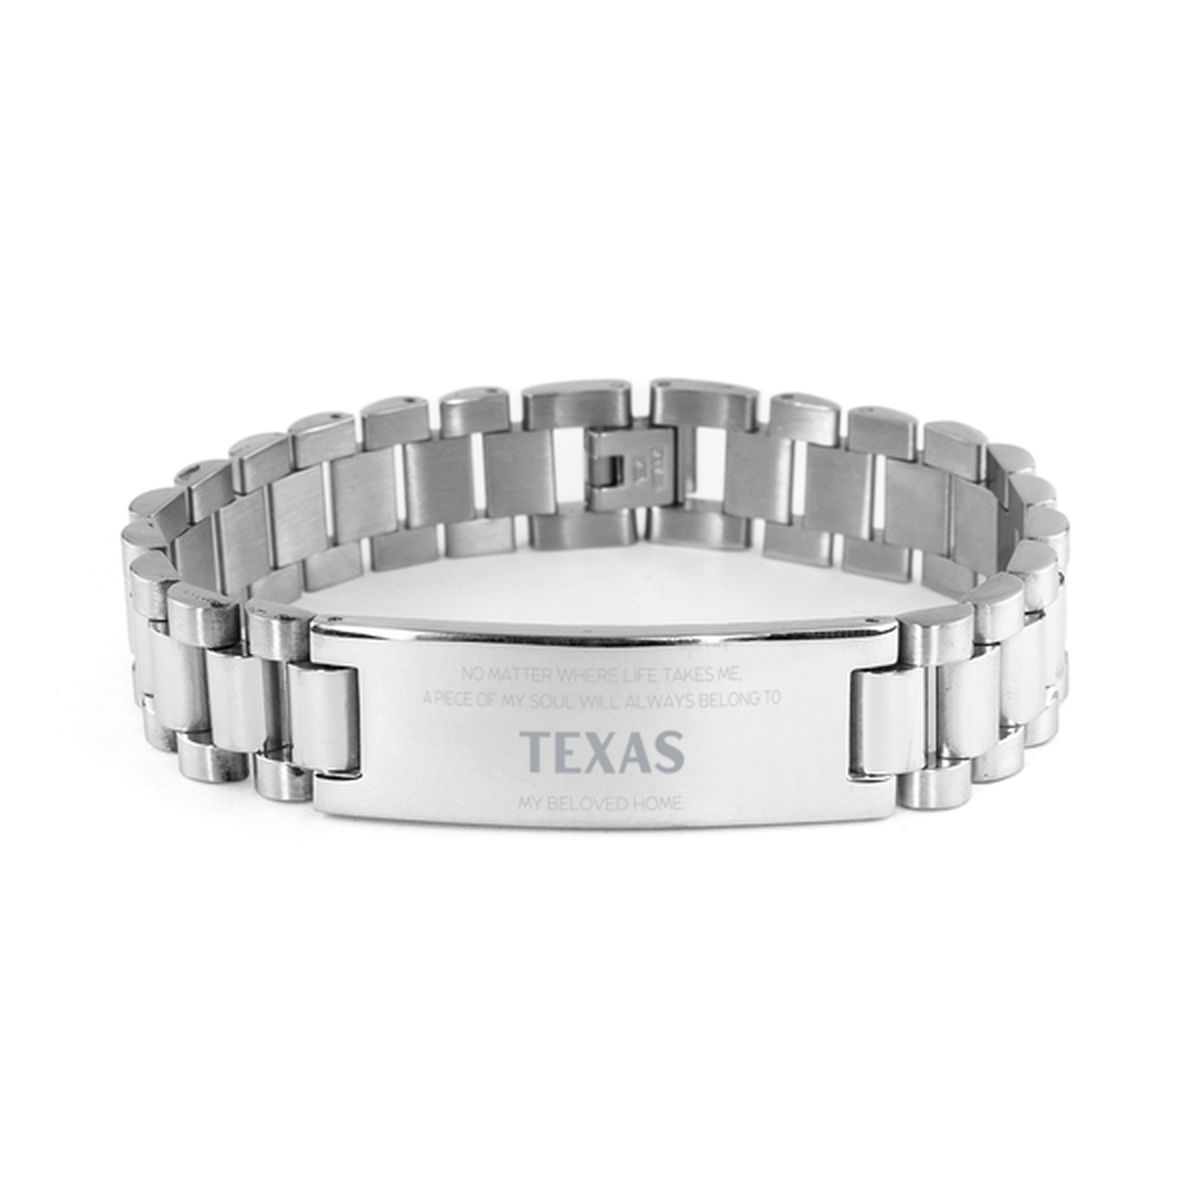 Love Texas State Gifts, My soul will always belong to Texas, Proud Ladder Stainless Steel Bracelet, Birthday Unique Gifts For Texas Men, Women, Friends